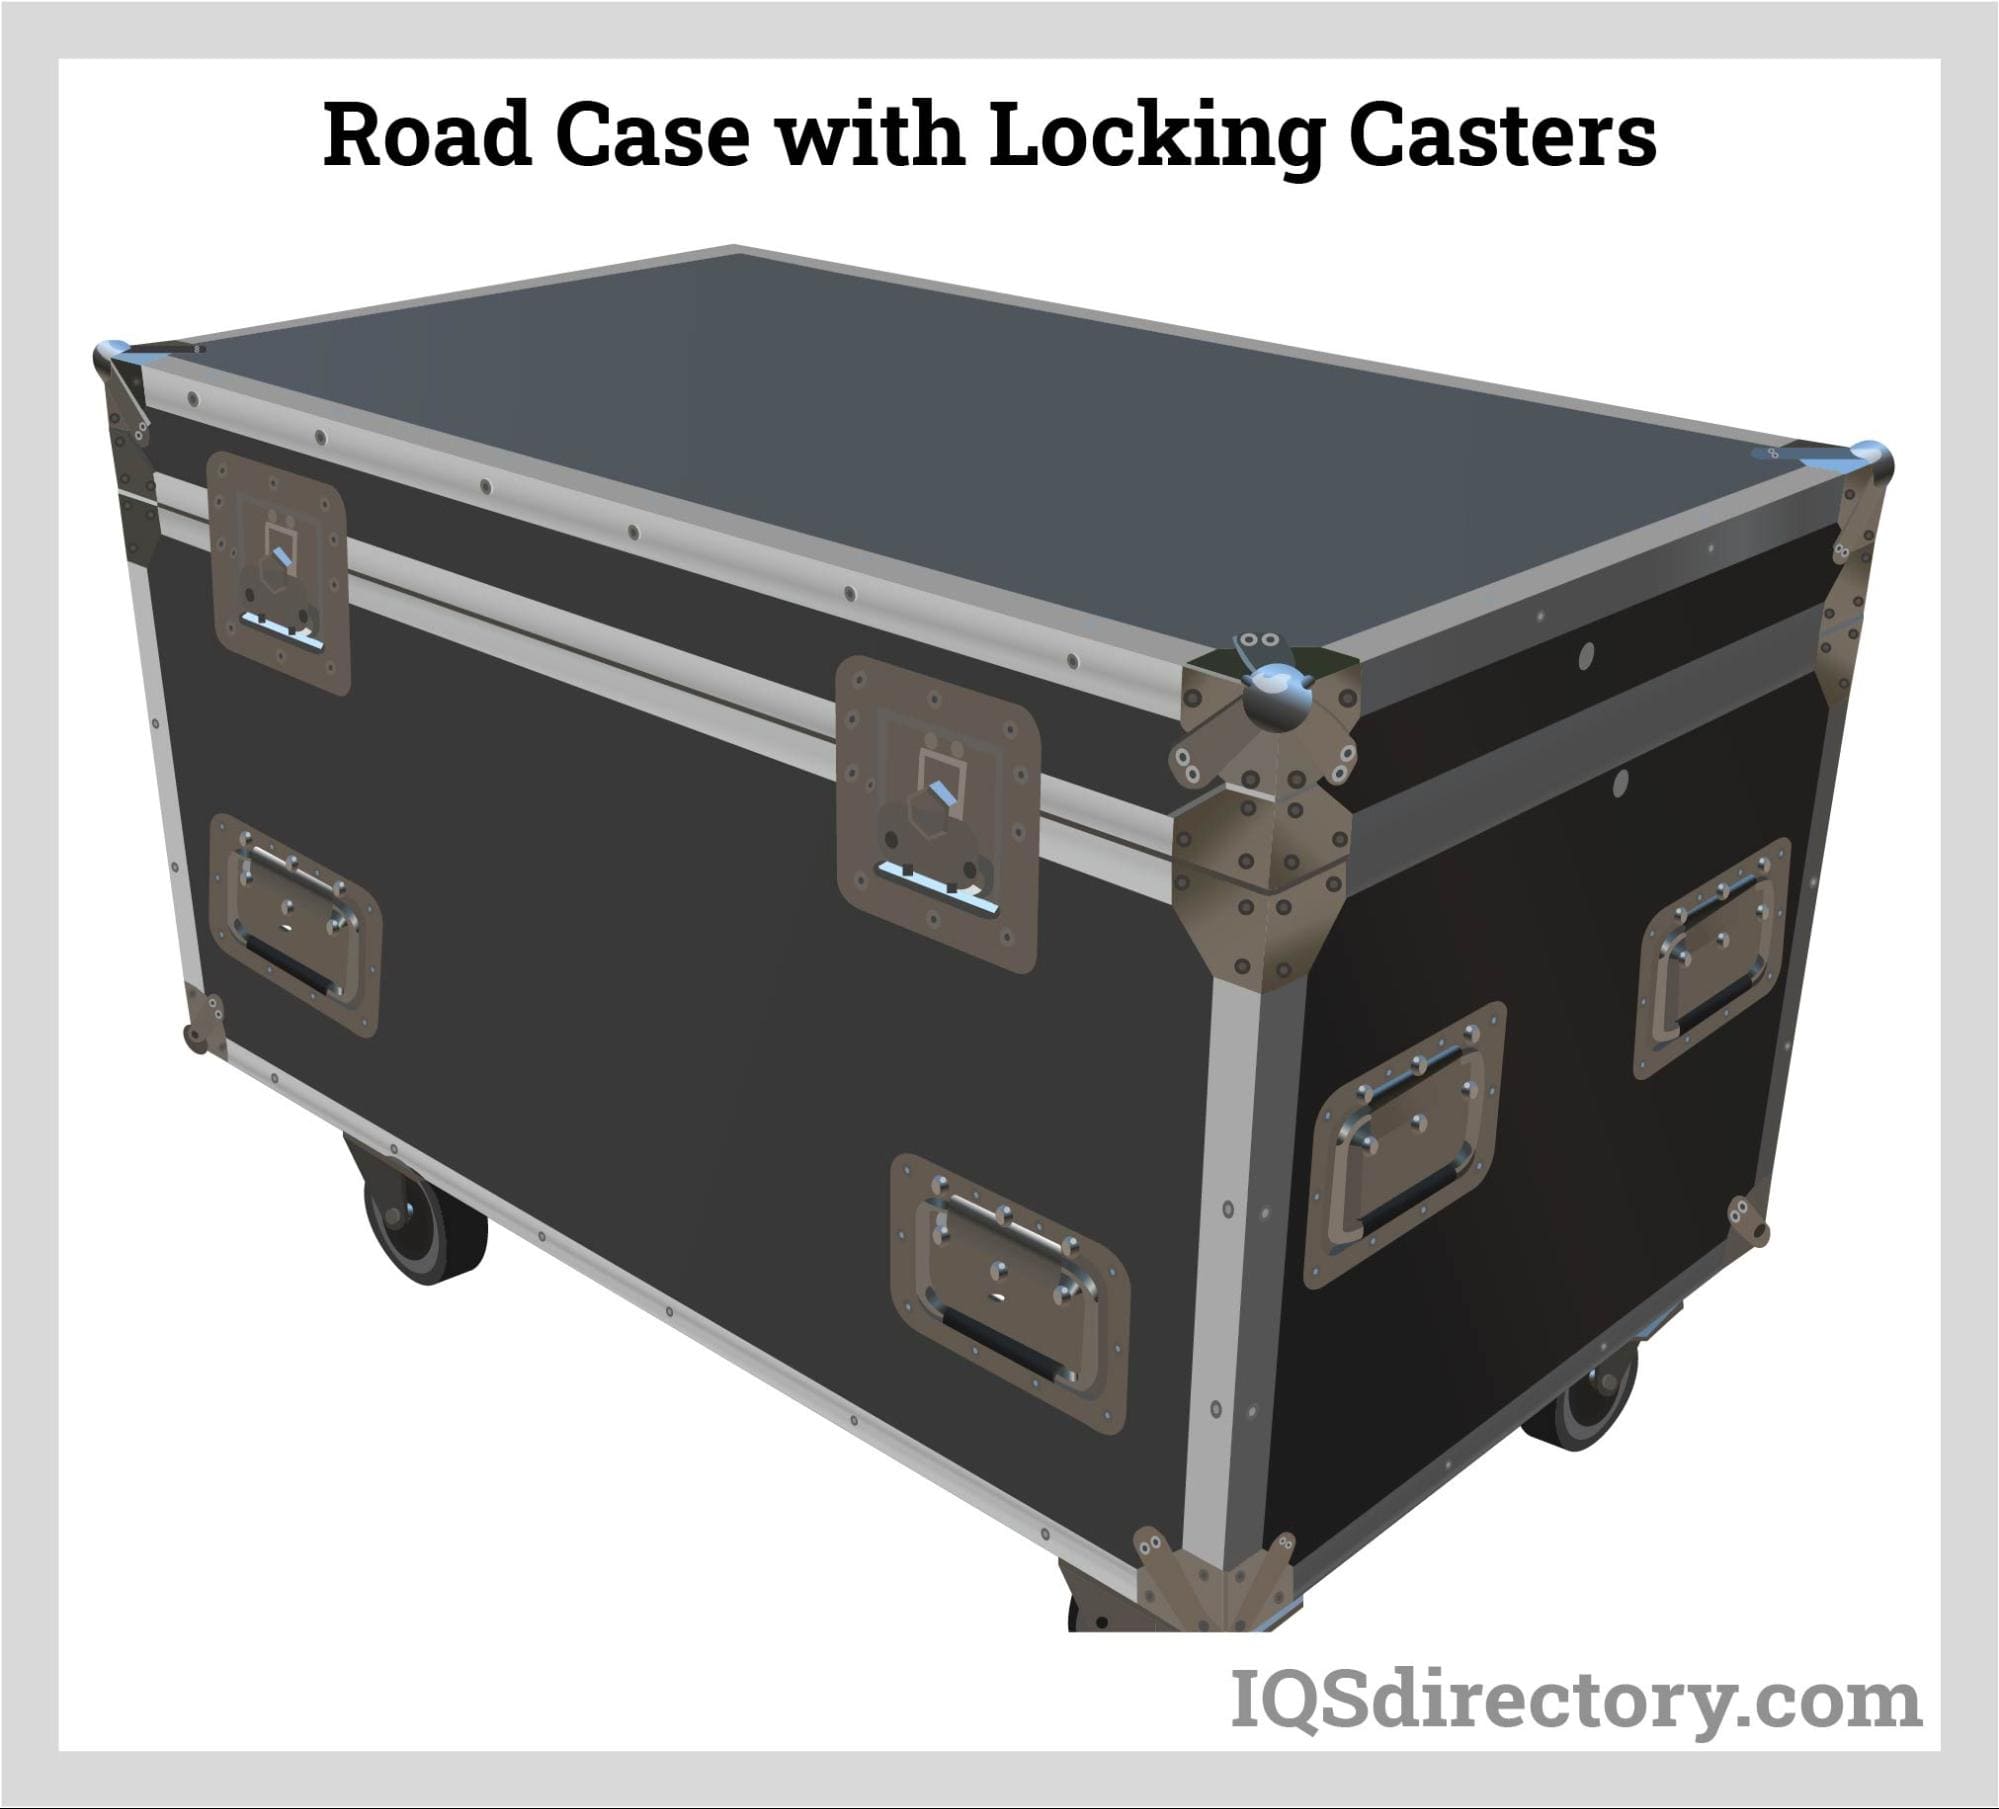 Road Case with Locking Casters